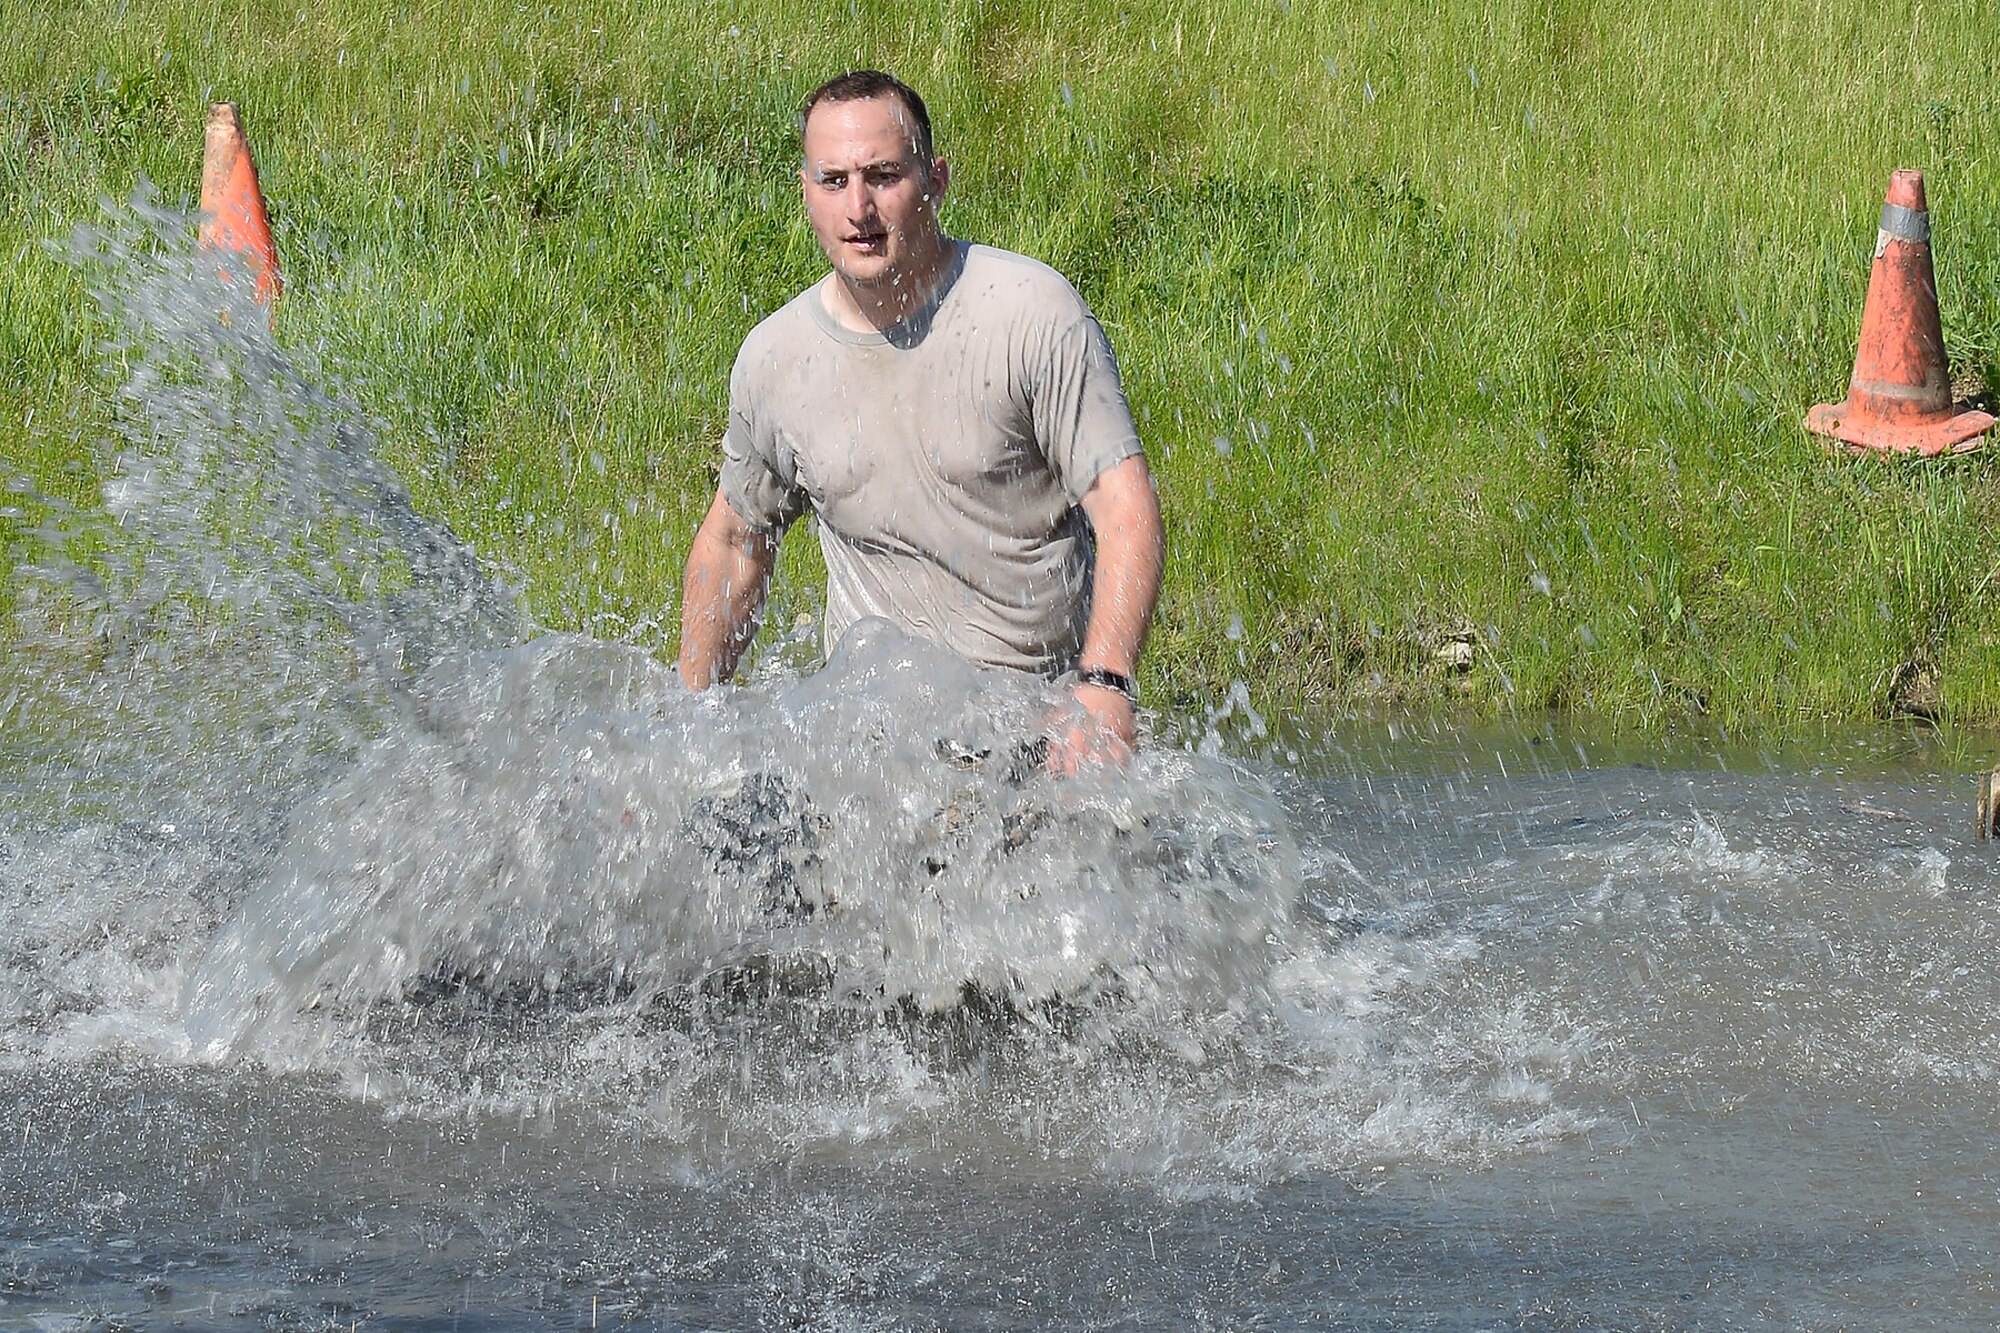 Tech. Sgt. Stephano Picchietti, 55th Security Forces Squadron, walks through water during an evasion challenge May 17, 2018, at Offutt Air Force Base, Nebraska. Police week was established in 1962 by President John F. Kennedy to honor fallen officers. (U.S. Air Force photo by Charles J. Haymond)